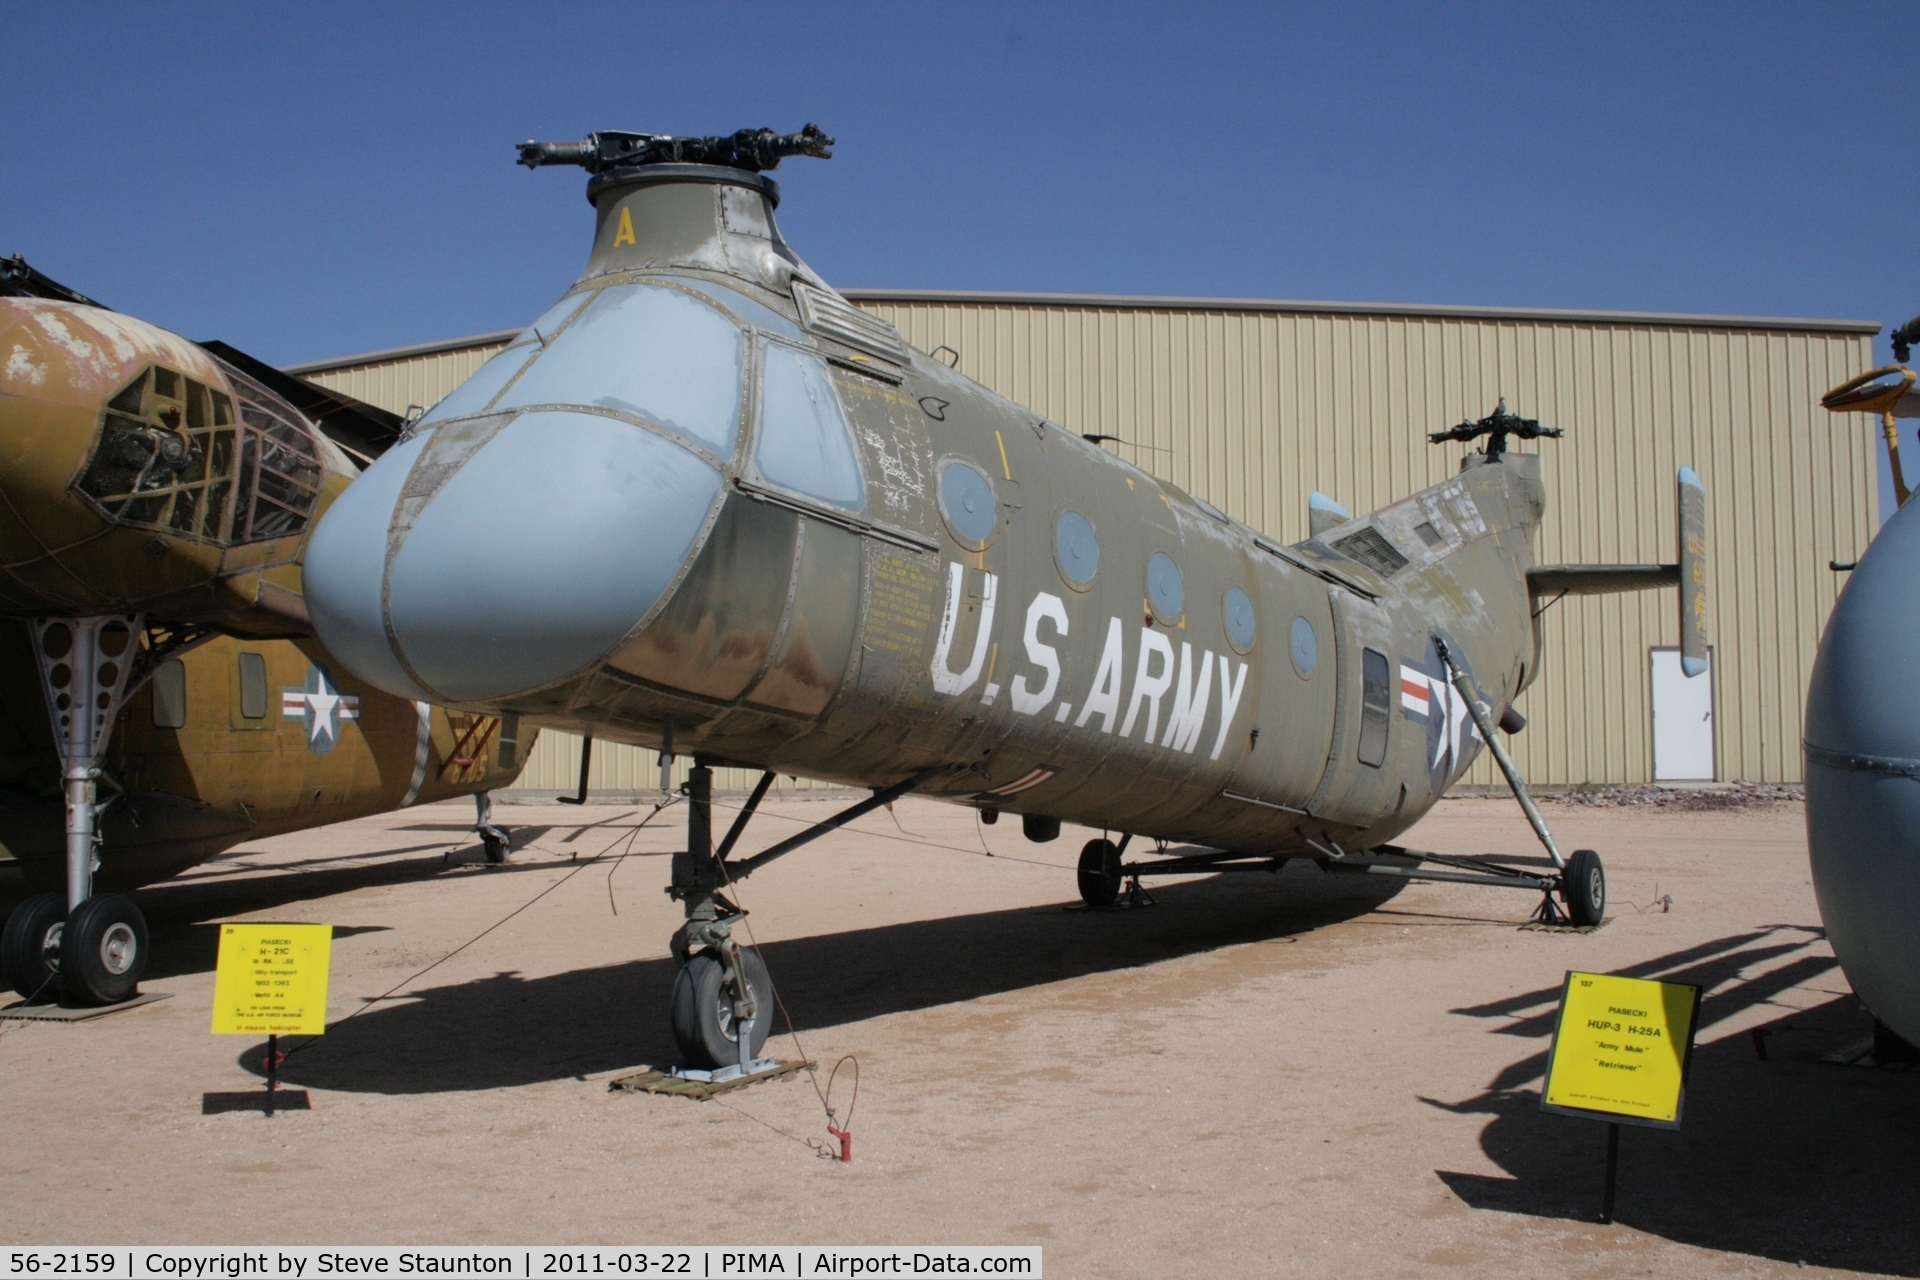 56-2159, 1956 Piasecki H-21C Shawnee C/N C.321, Taken at Pima Air and Space Museum, in March 2011 whilst on an Aeroprint Aviation tour